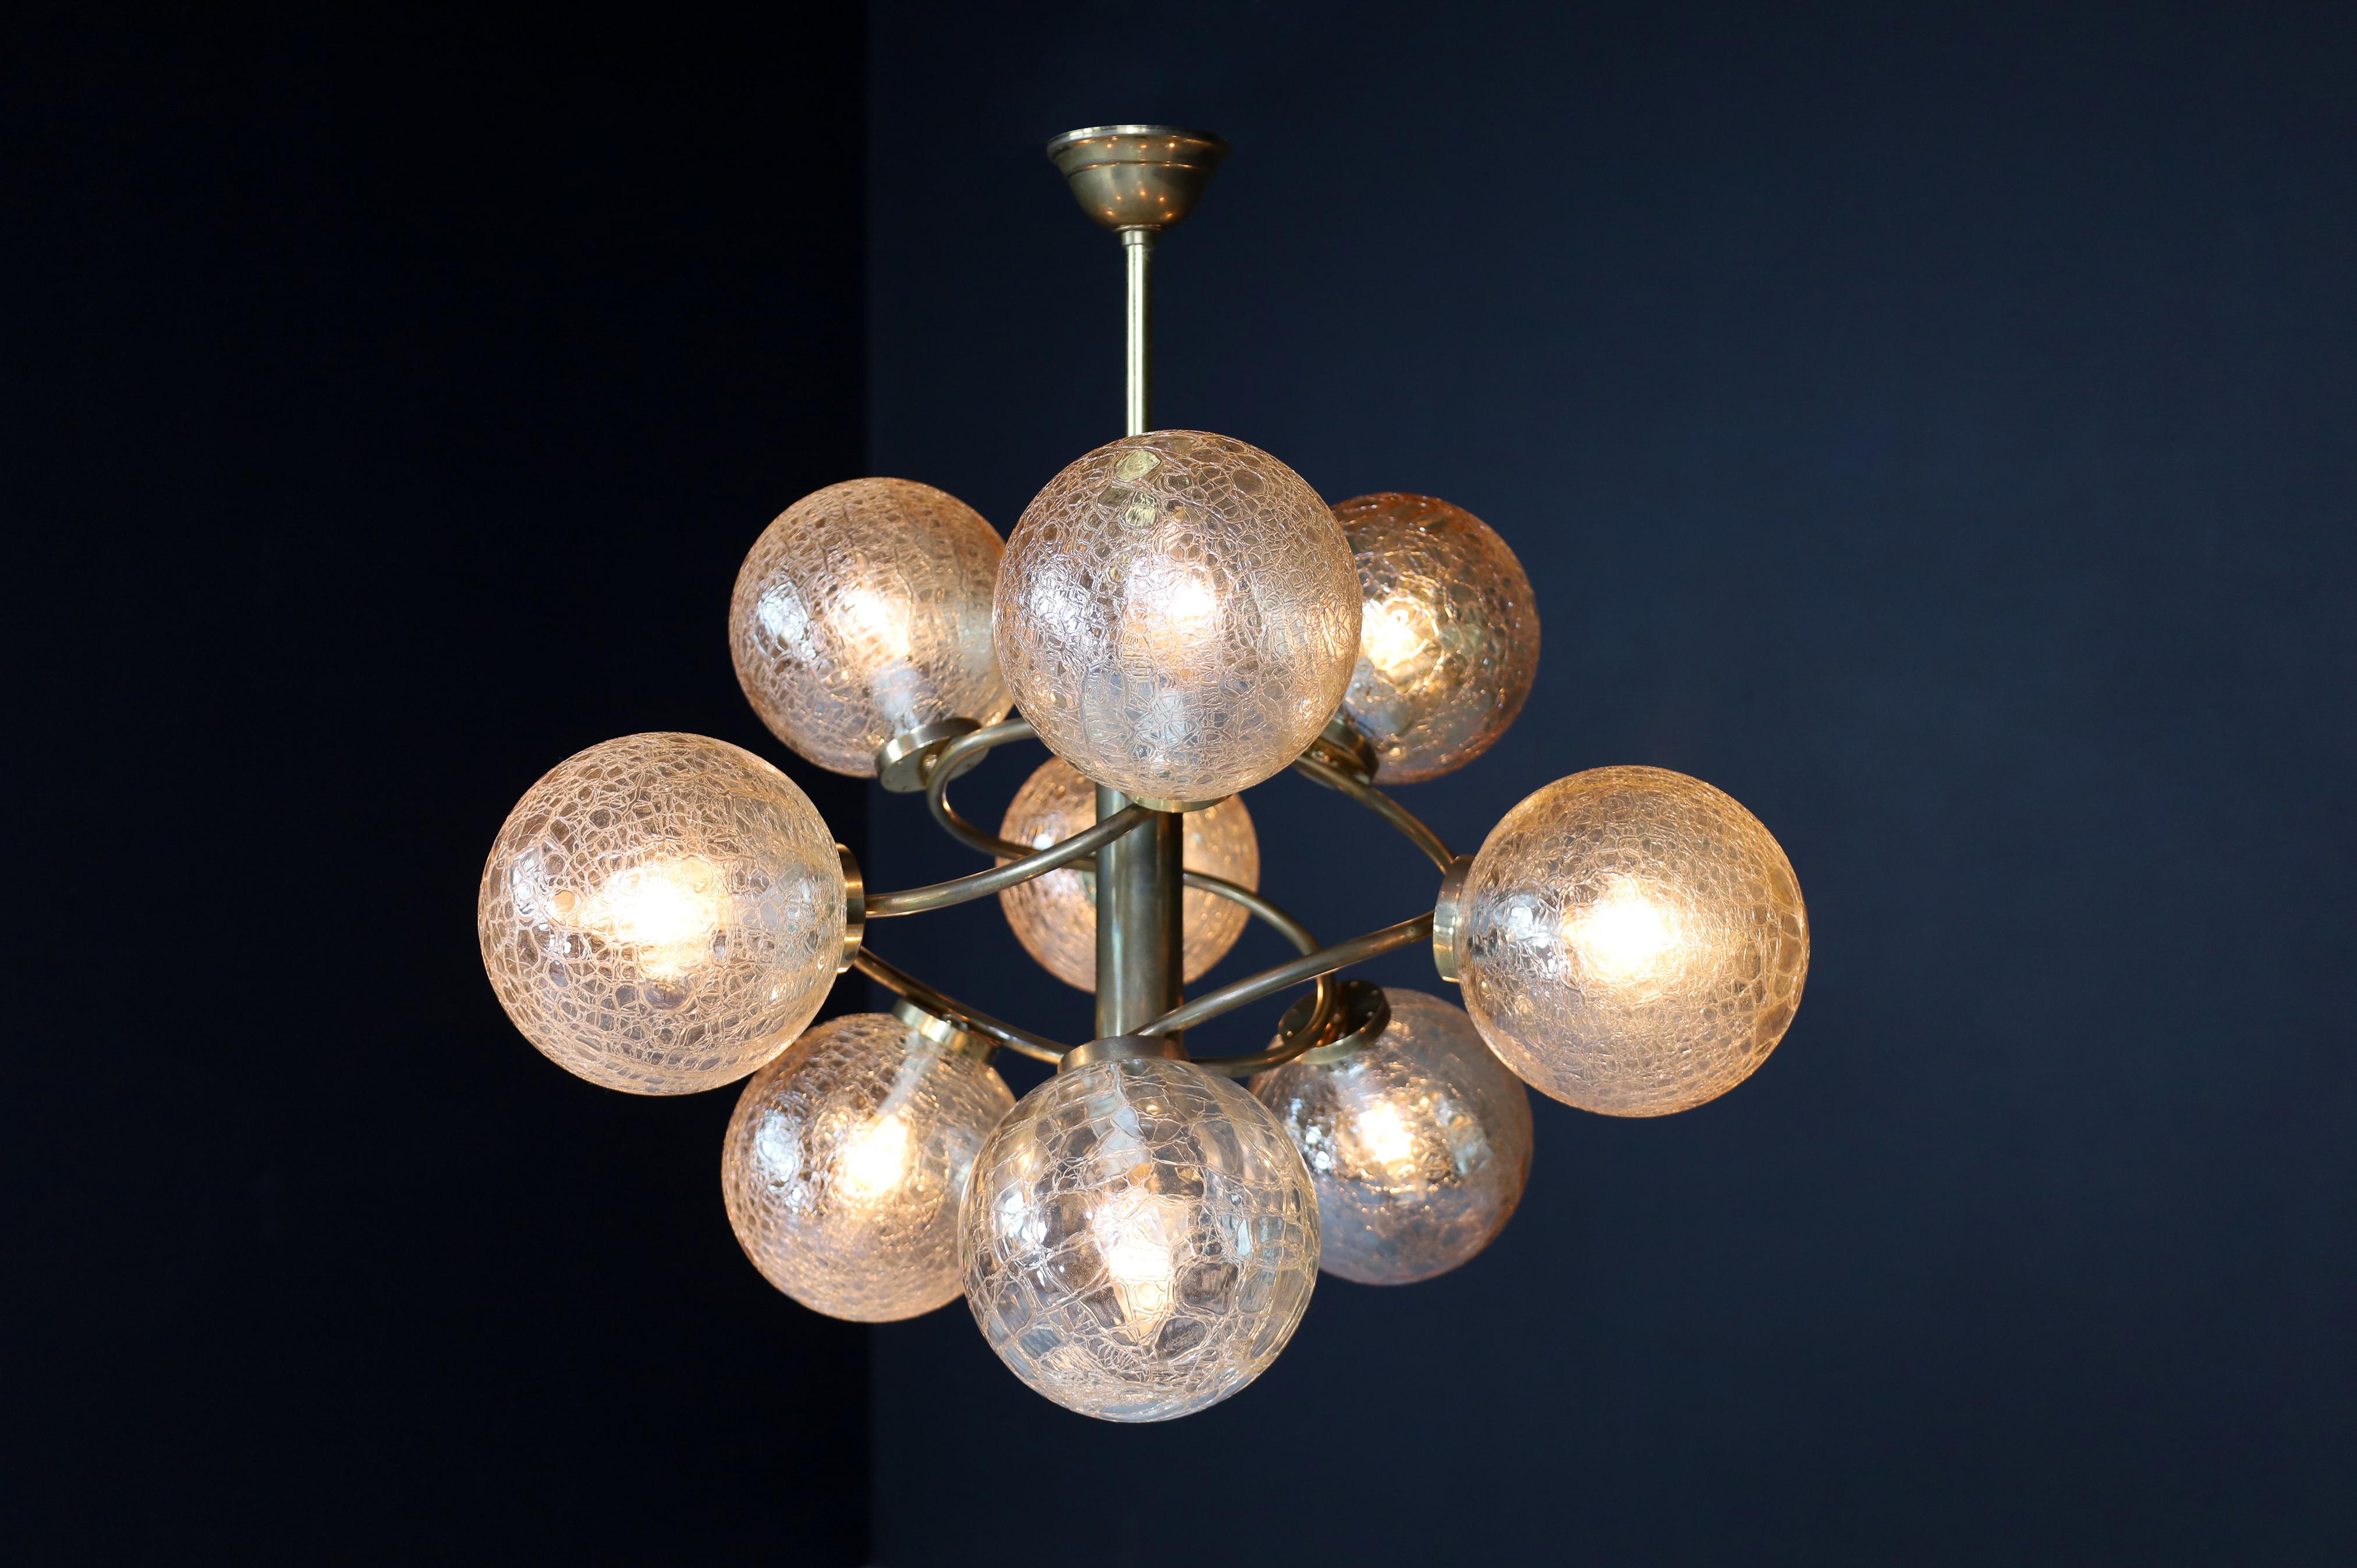 Patinated brass chandelier wit nine amber-colored globes, Germany 1960s.

A chandelier with a patinated brass fixture was made and designed in Germany in the 1960s. Completed with the nine structured amber-colored globes and brass frame wil this